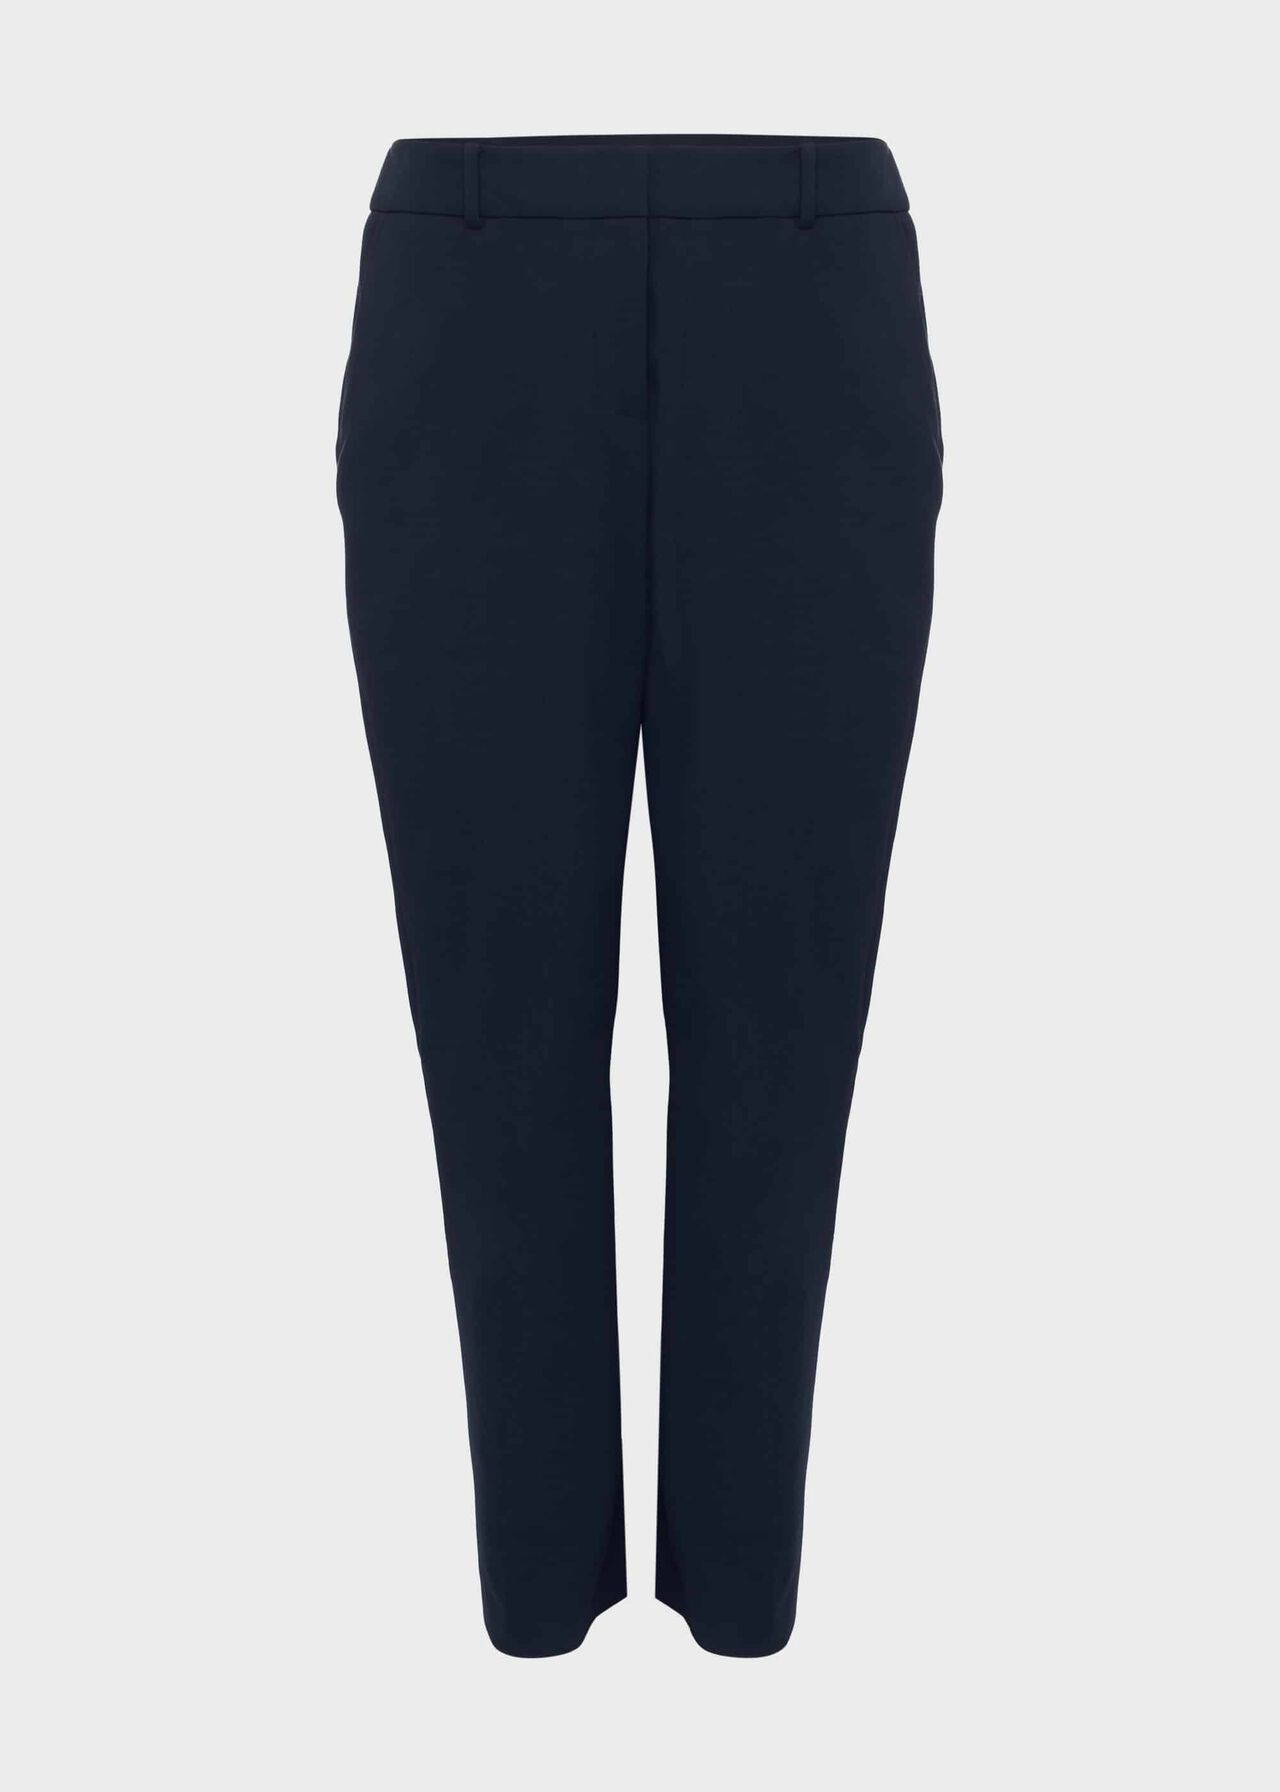 Quin Tapered Pants With Stretch, Navy, hi-res